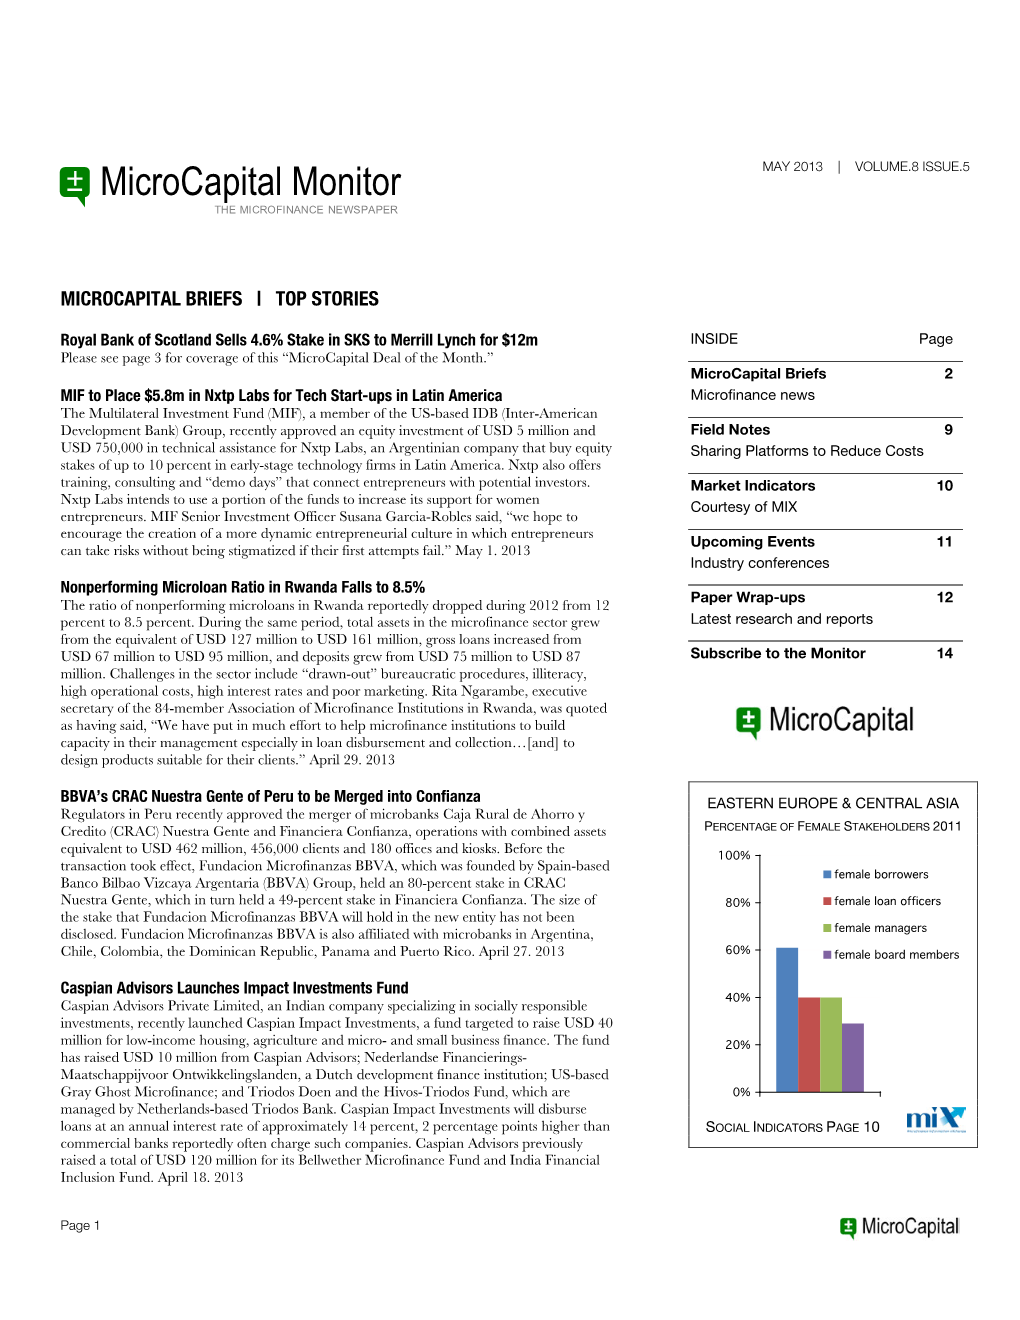 Microcapital Monitor MAY 2013 | VOLUME.8 ISSUE.5 the MICROFINANCE NEWSPAPER